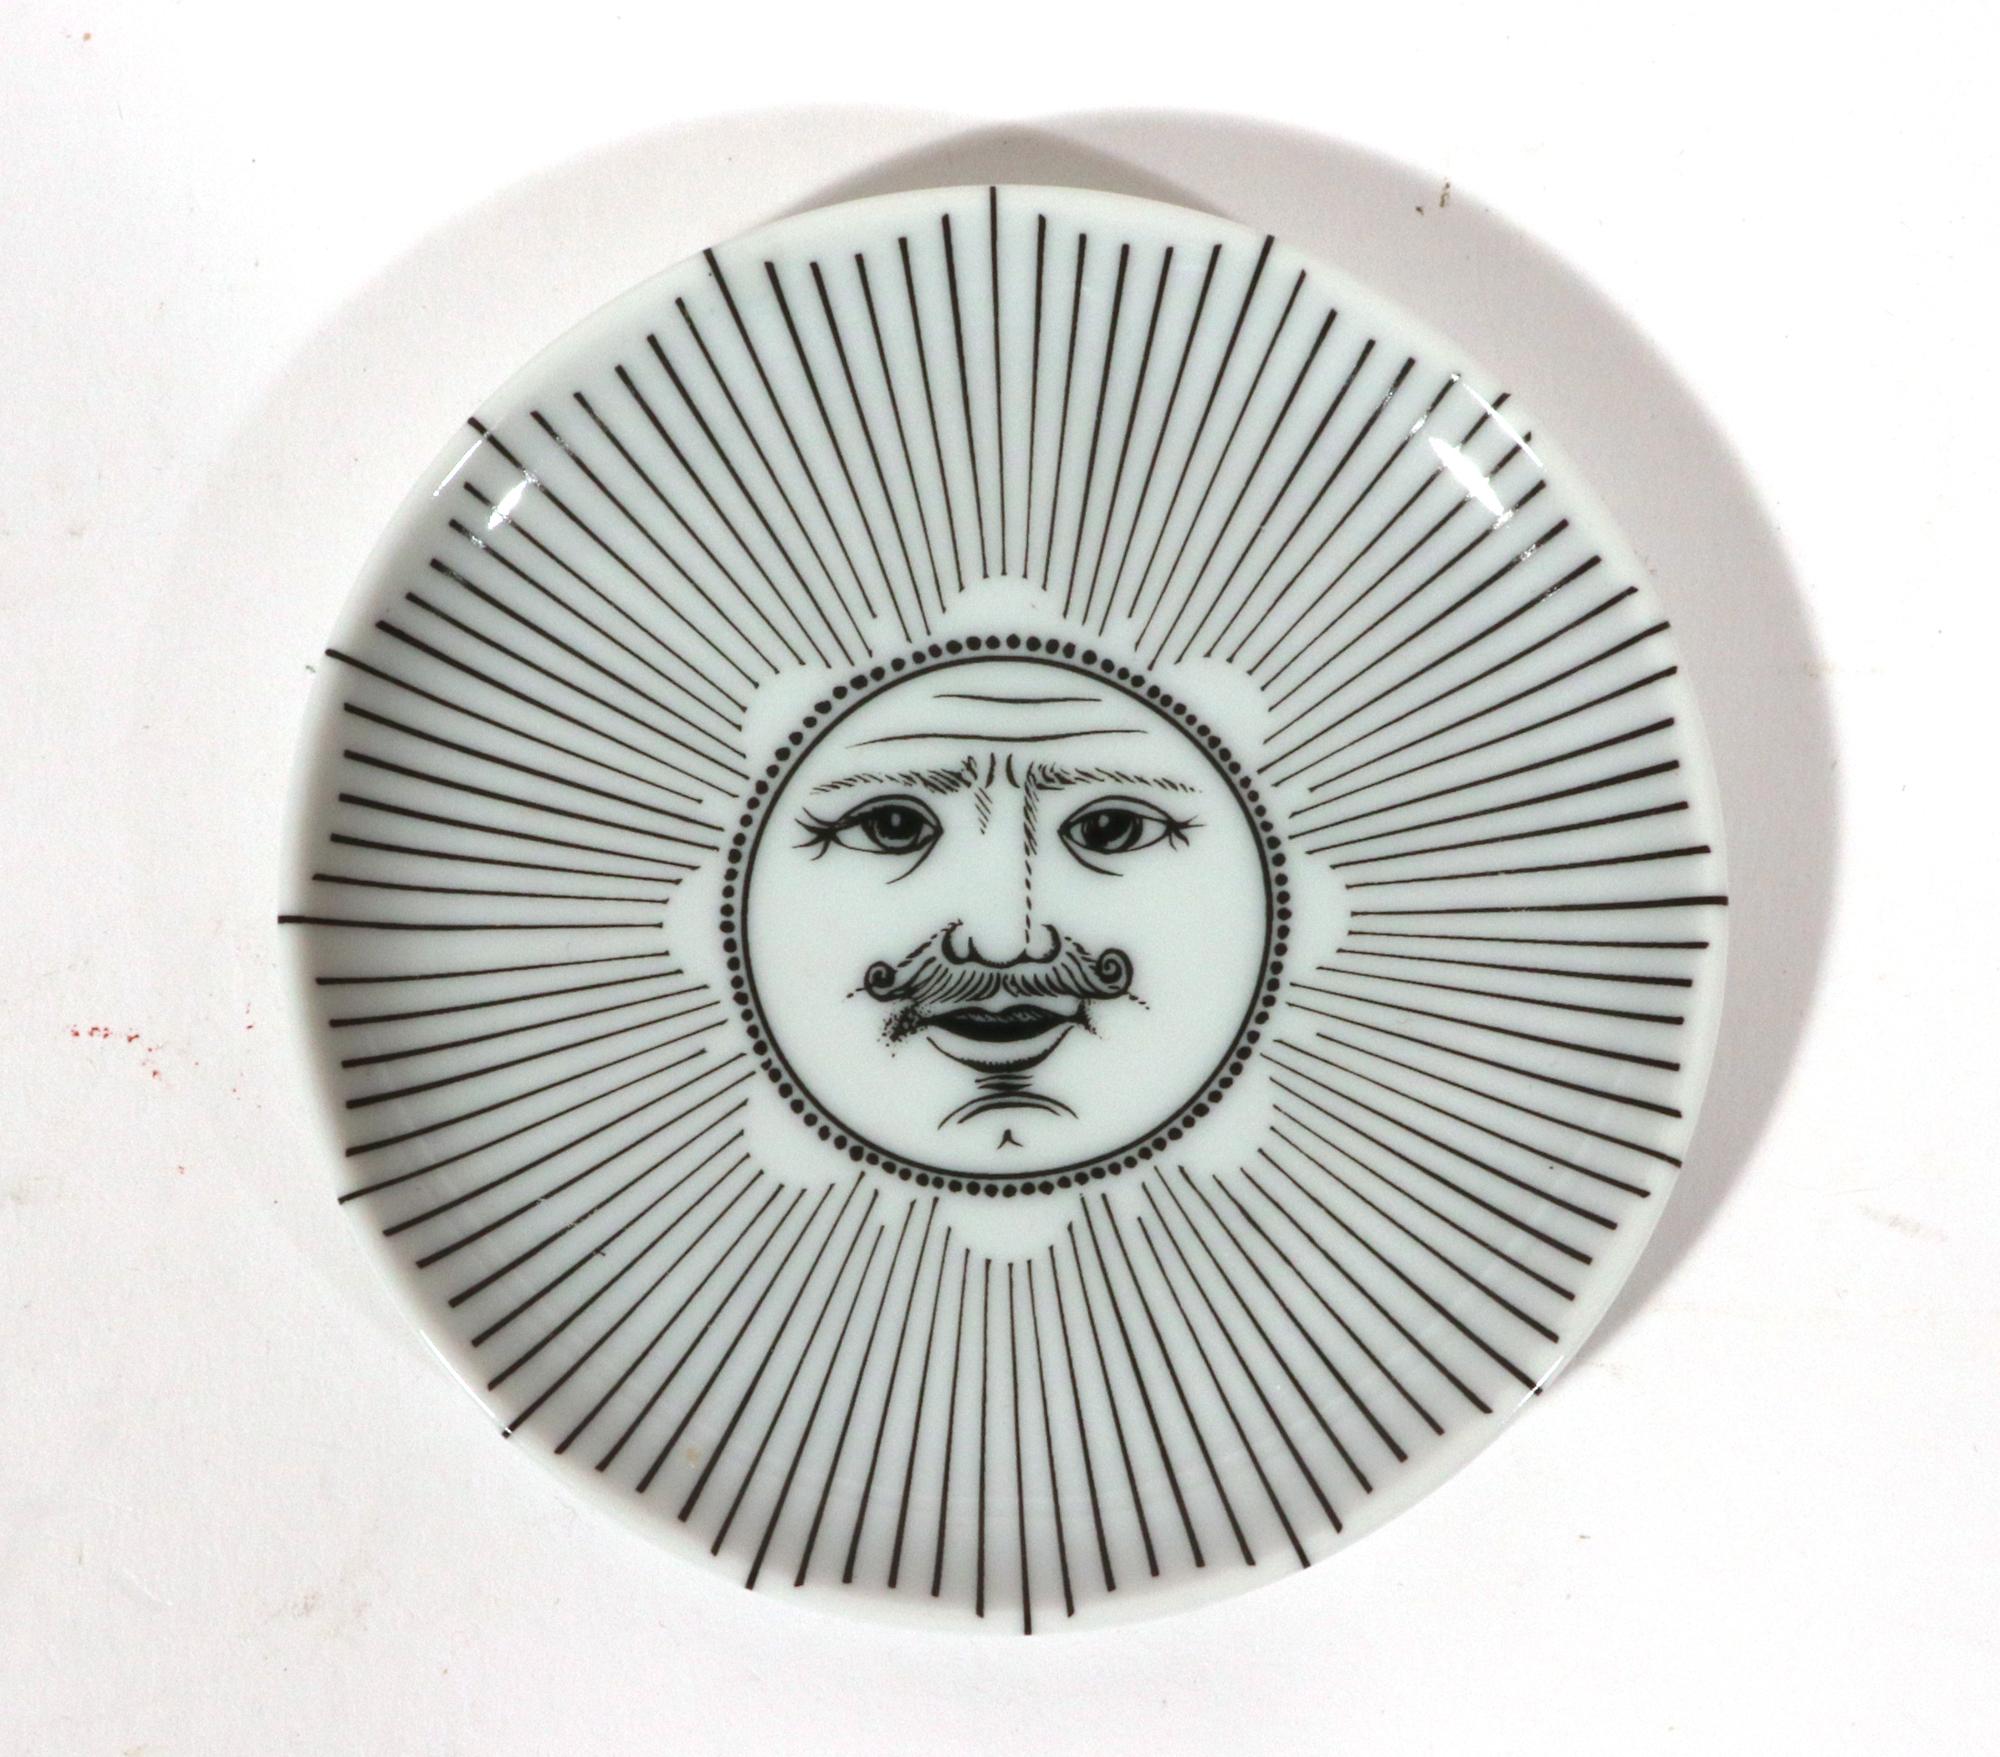 Soli E Lune Sun and Moon Pattern Ceramic Coasters by  Piero Fornasetti In Good Condition For Sale In Downingtown, PA